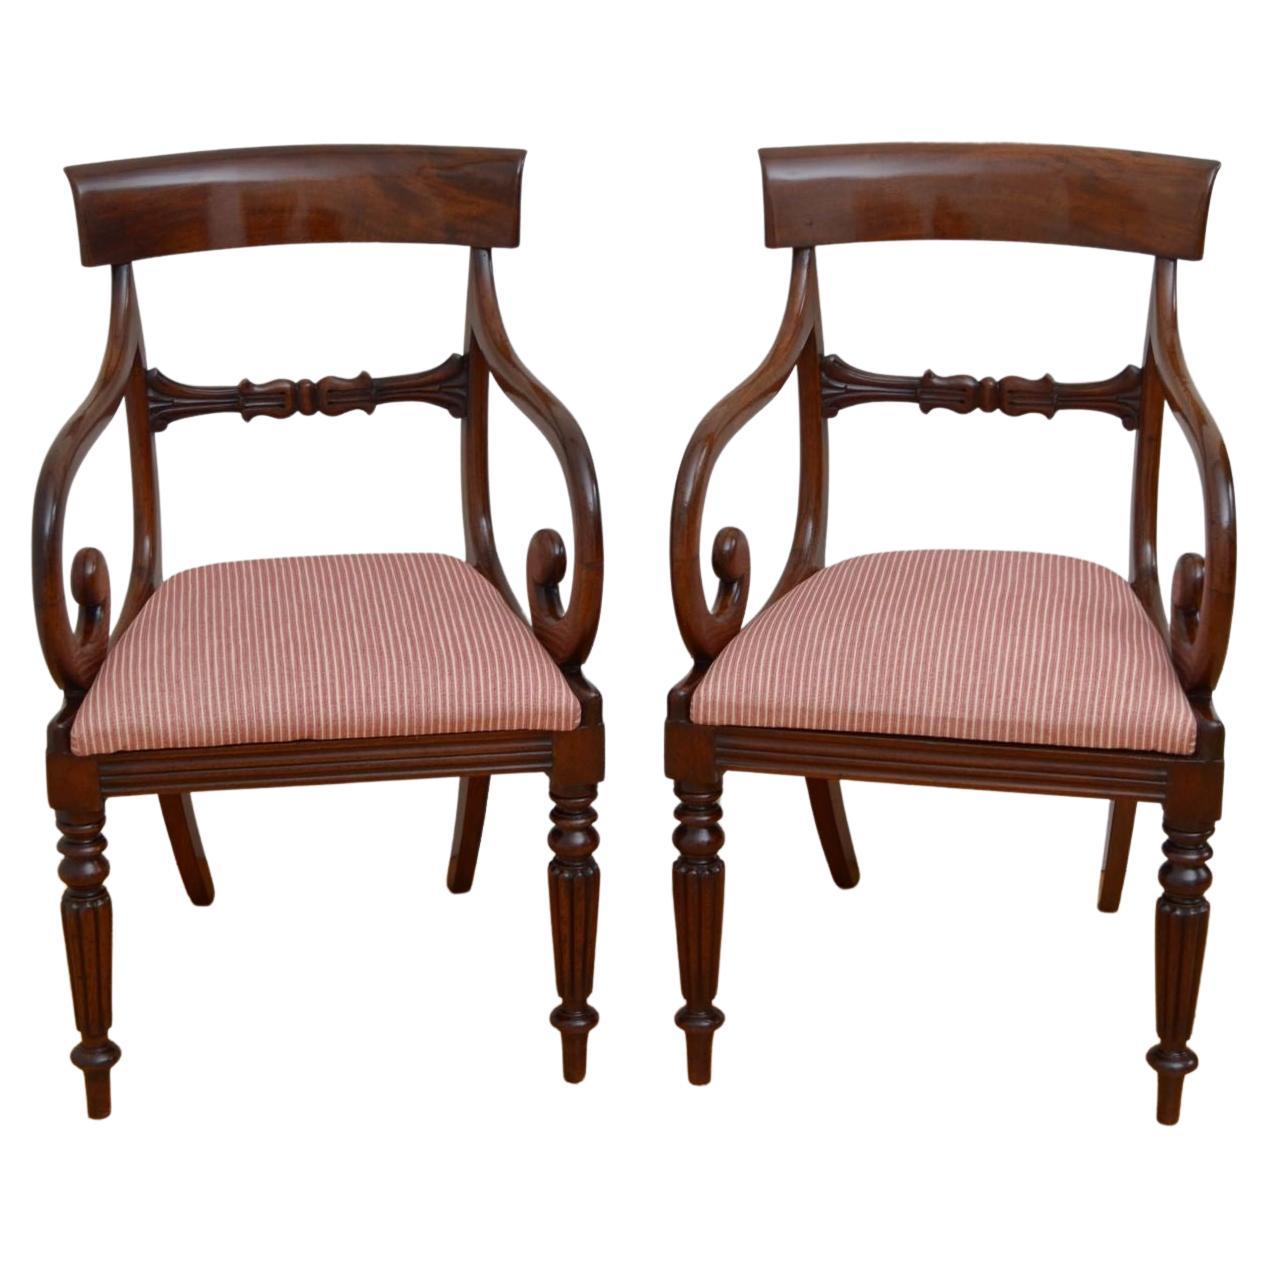 Pair of William IV Mahogany Carvers For Sale